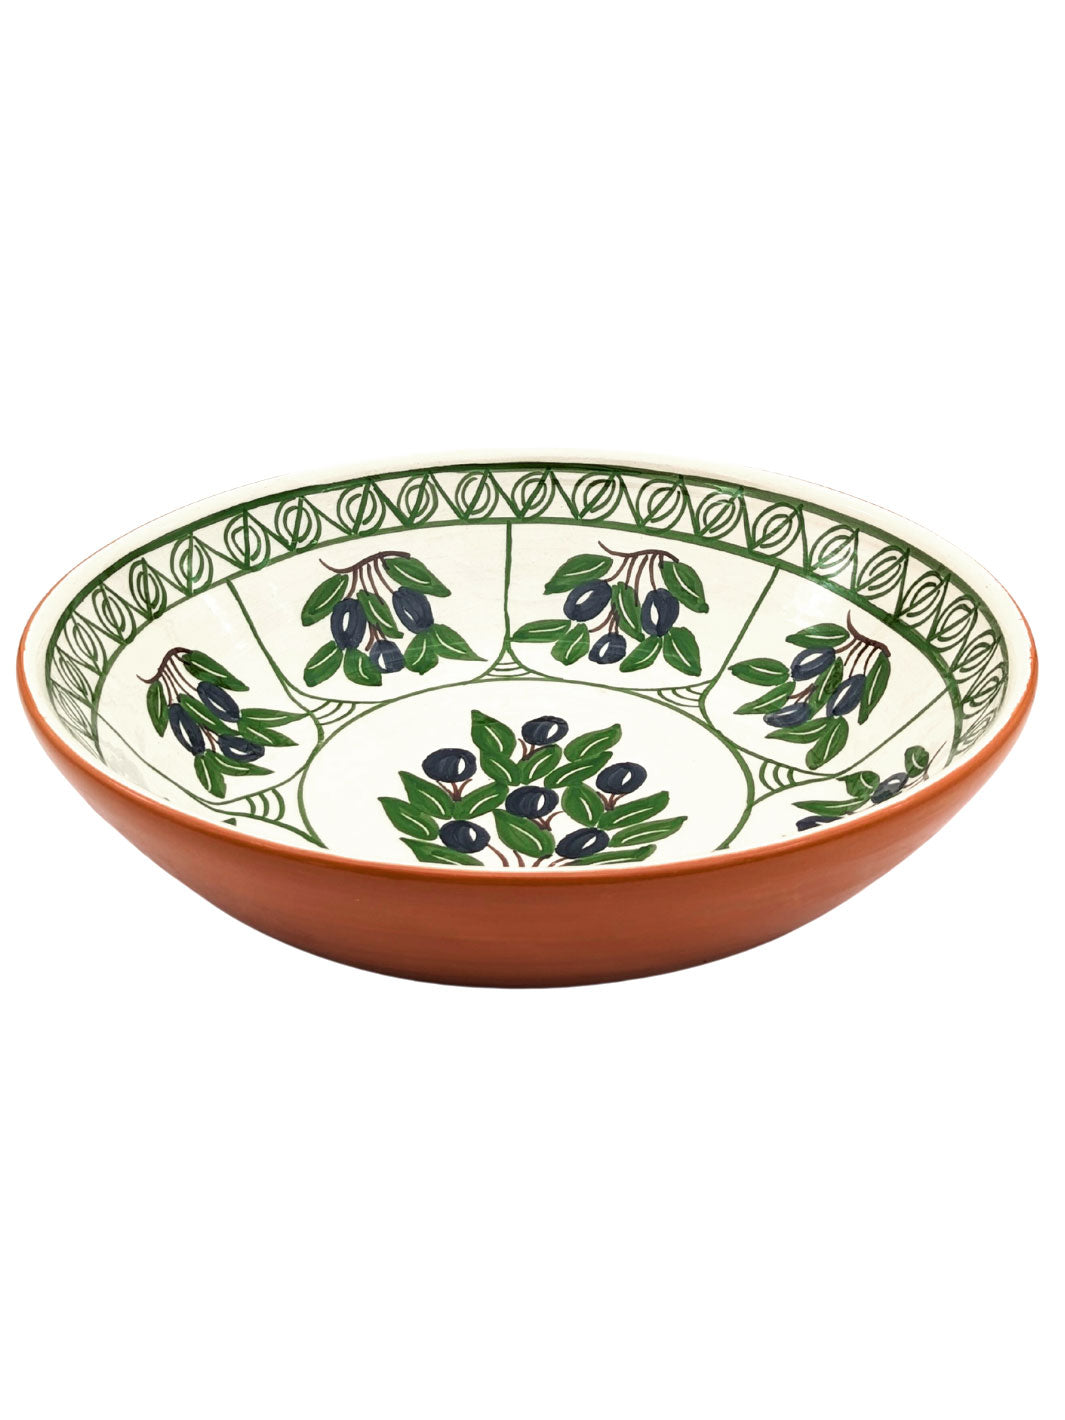 Olives Collection - Handcrafted Portuguese Pottery Ceramic Serving Bowl